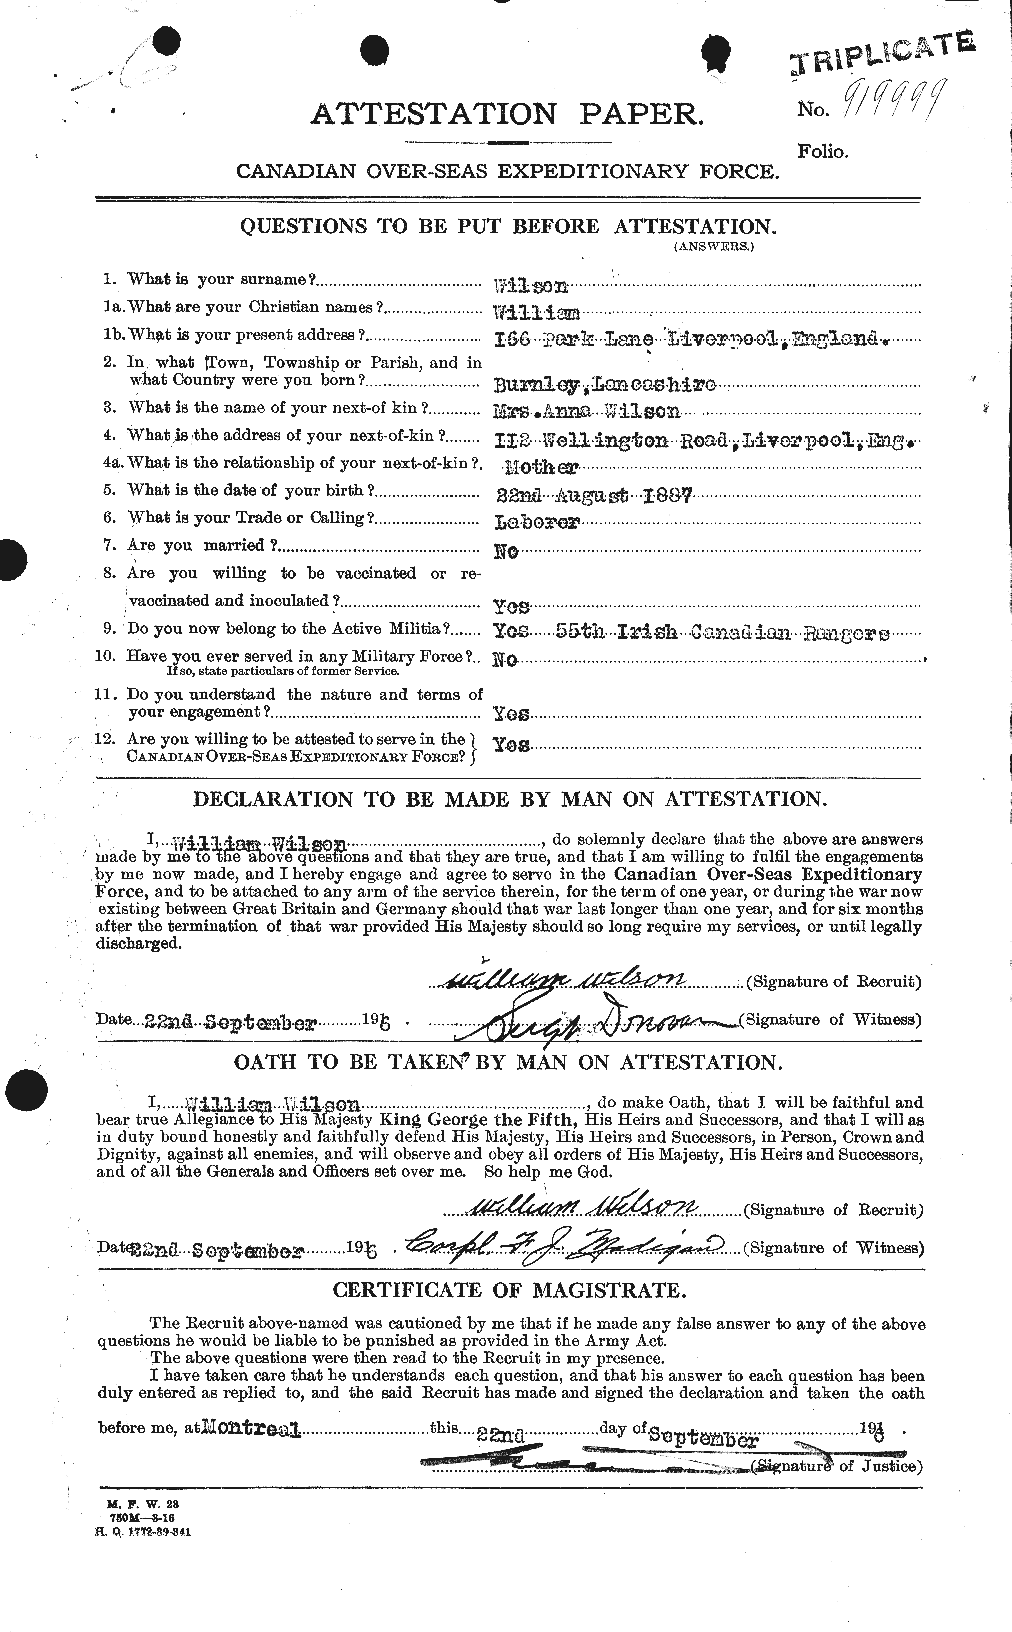 Personnel Records of the First World War - CEF 681821a